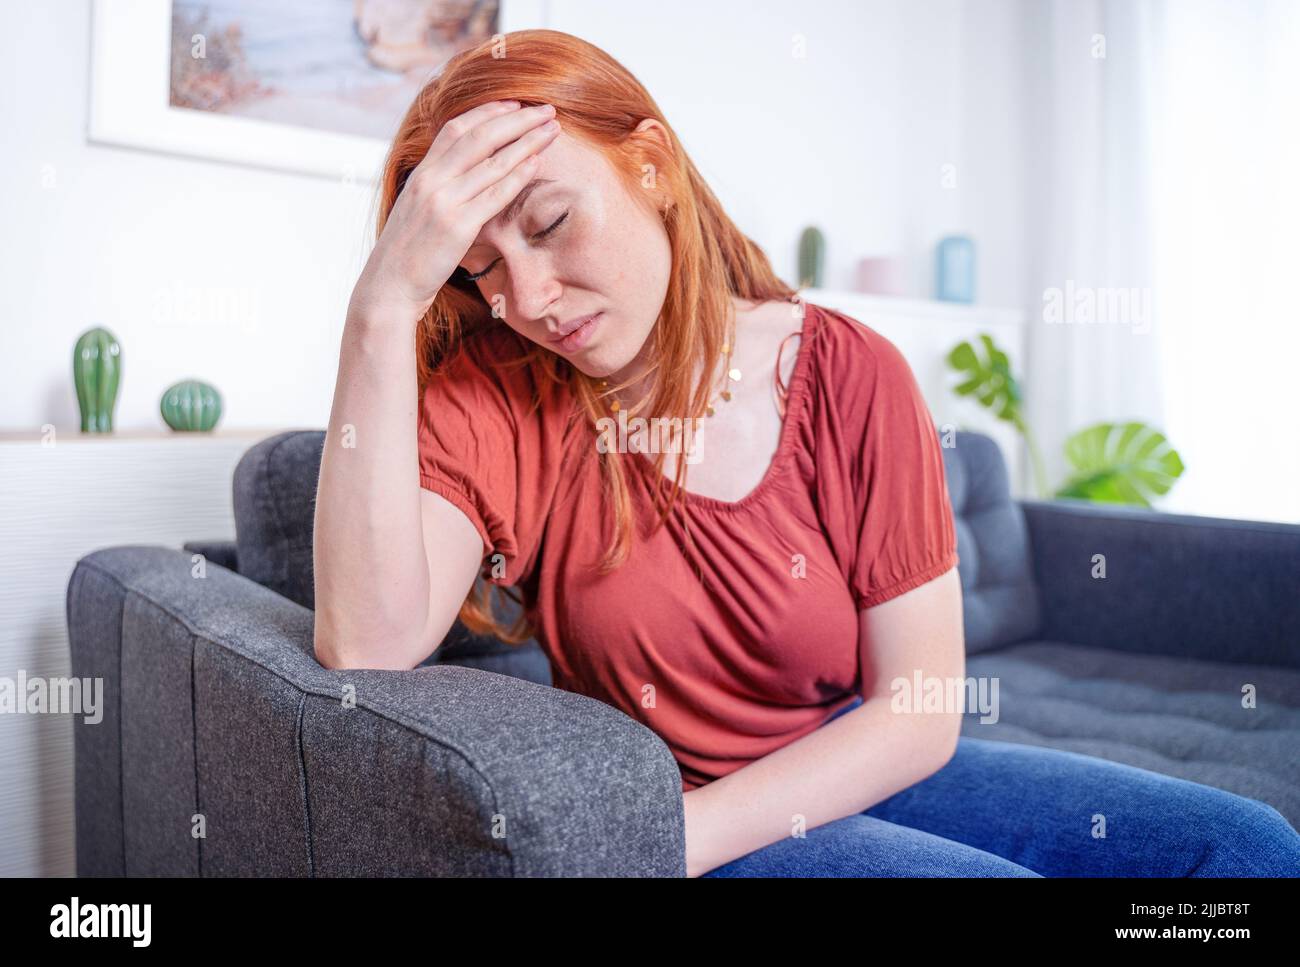 Young woman at home suffering severe chronic headache Stock Photo